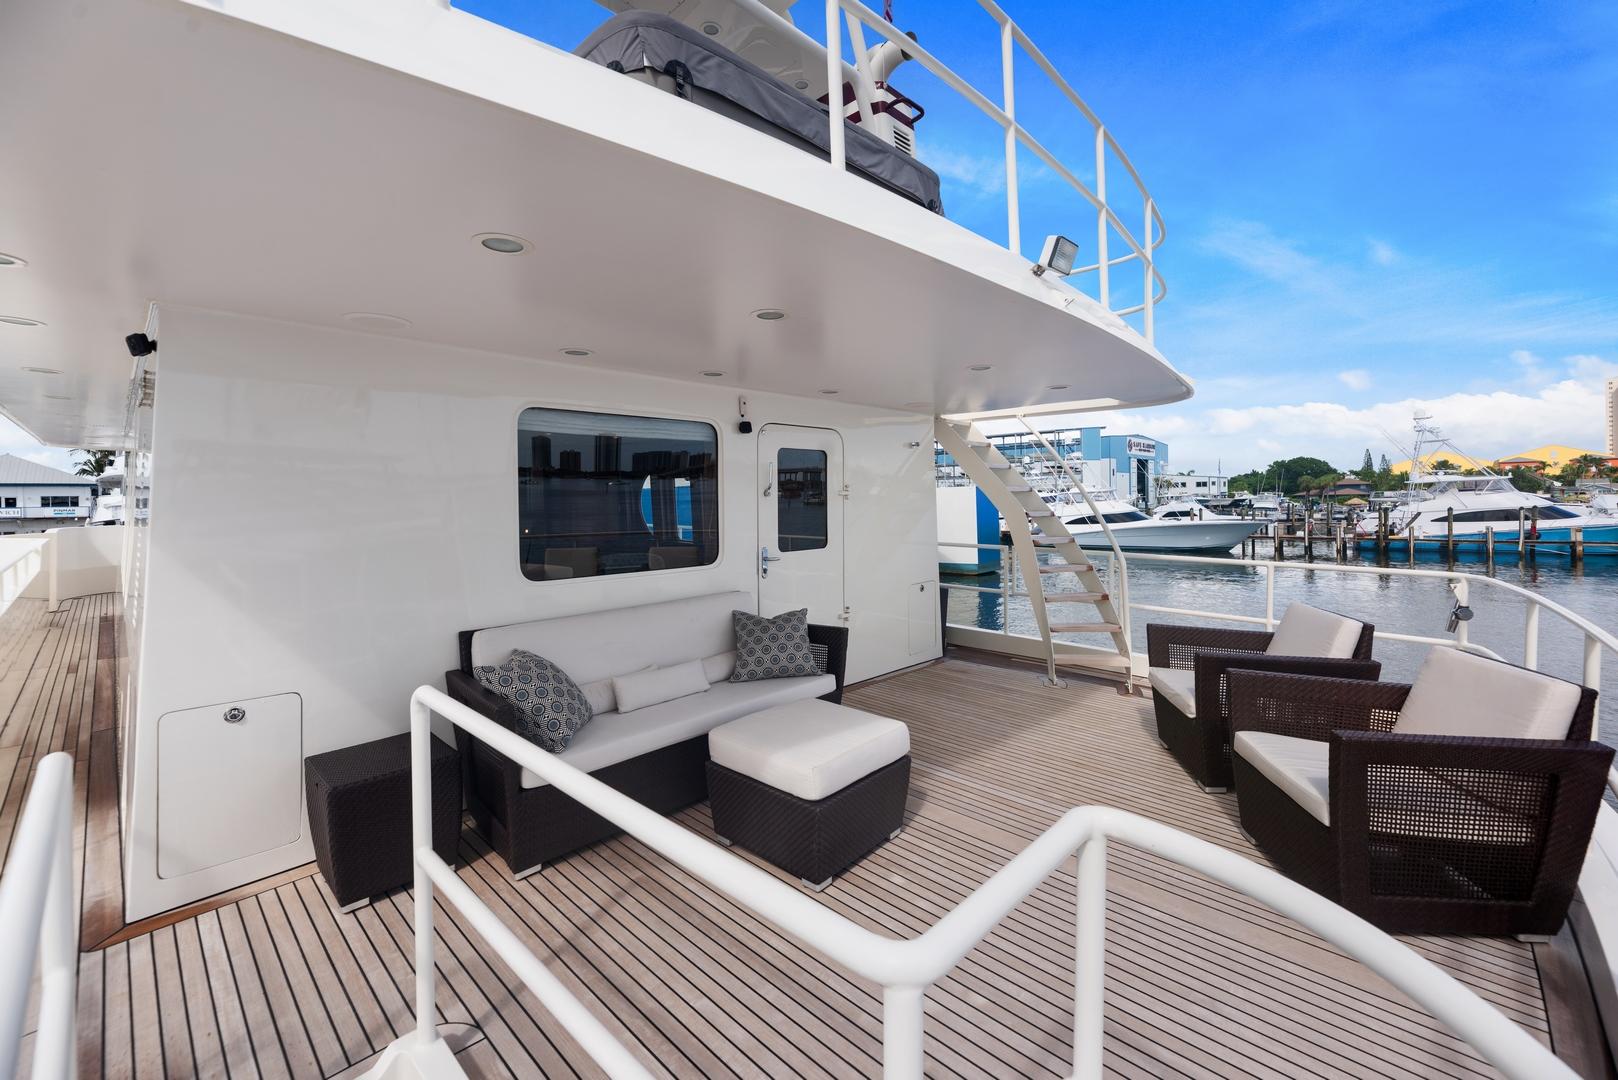 AB Normal 98'10 Inace Exterior Aft Lounge